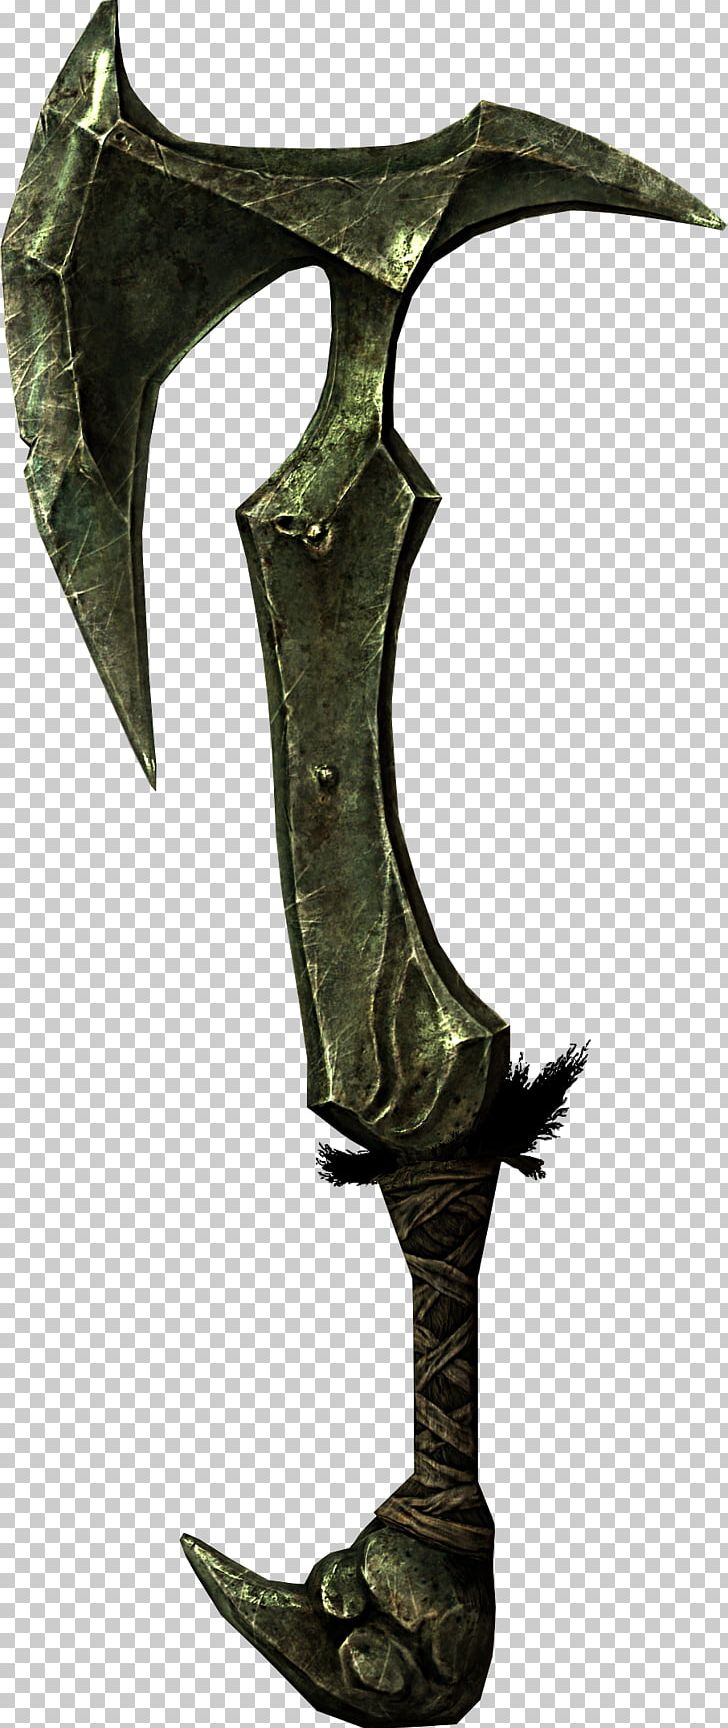 The Elder Scrolls V: Skyrim Weapon Knife Battle Axe PNG, Clipart, Axe, Battle Axe, Bearded Axe, Blade, Cold Weapon Free PNG Download